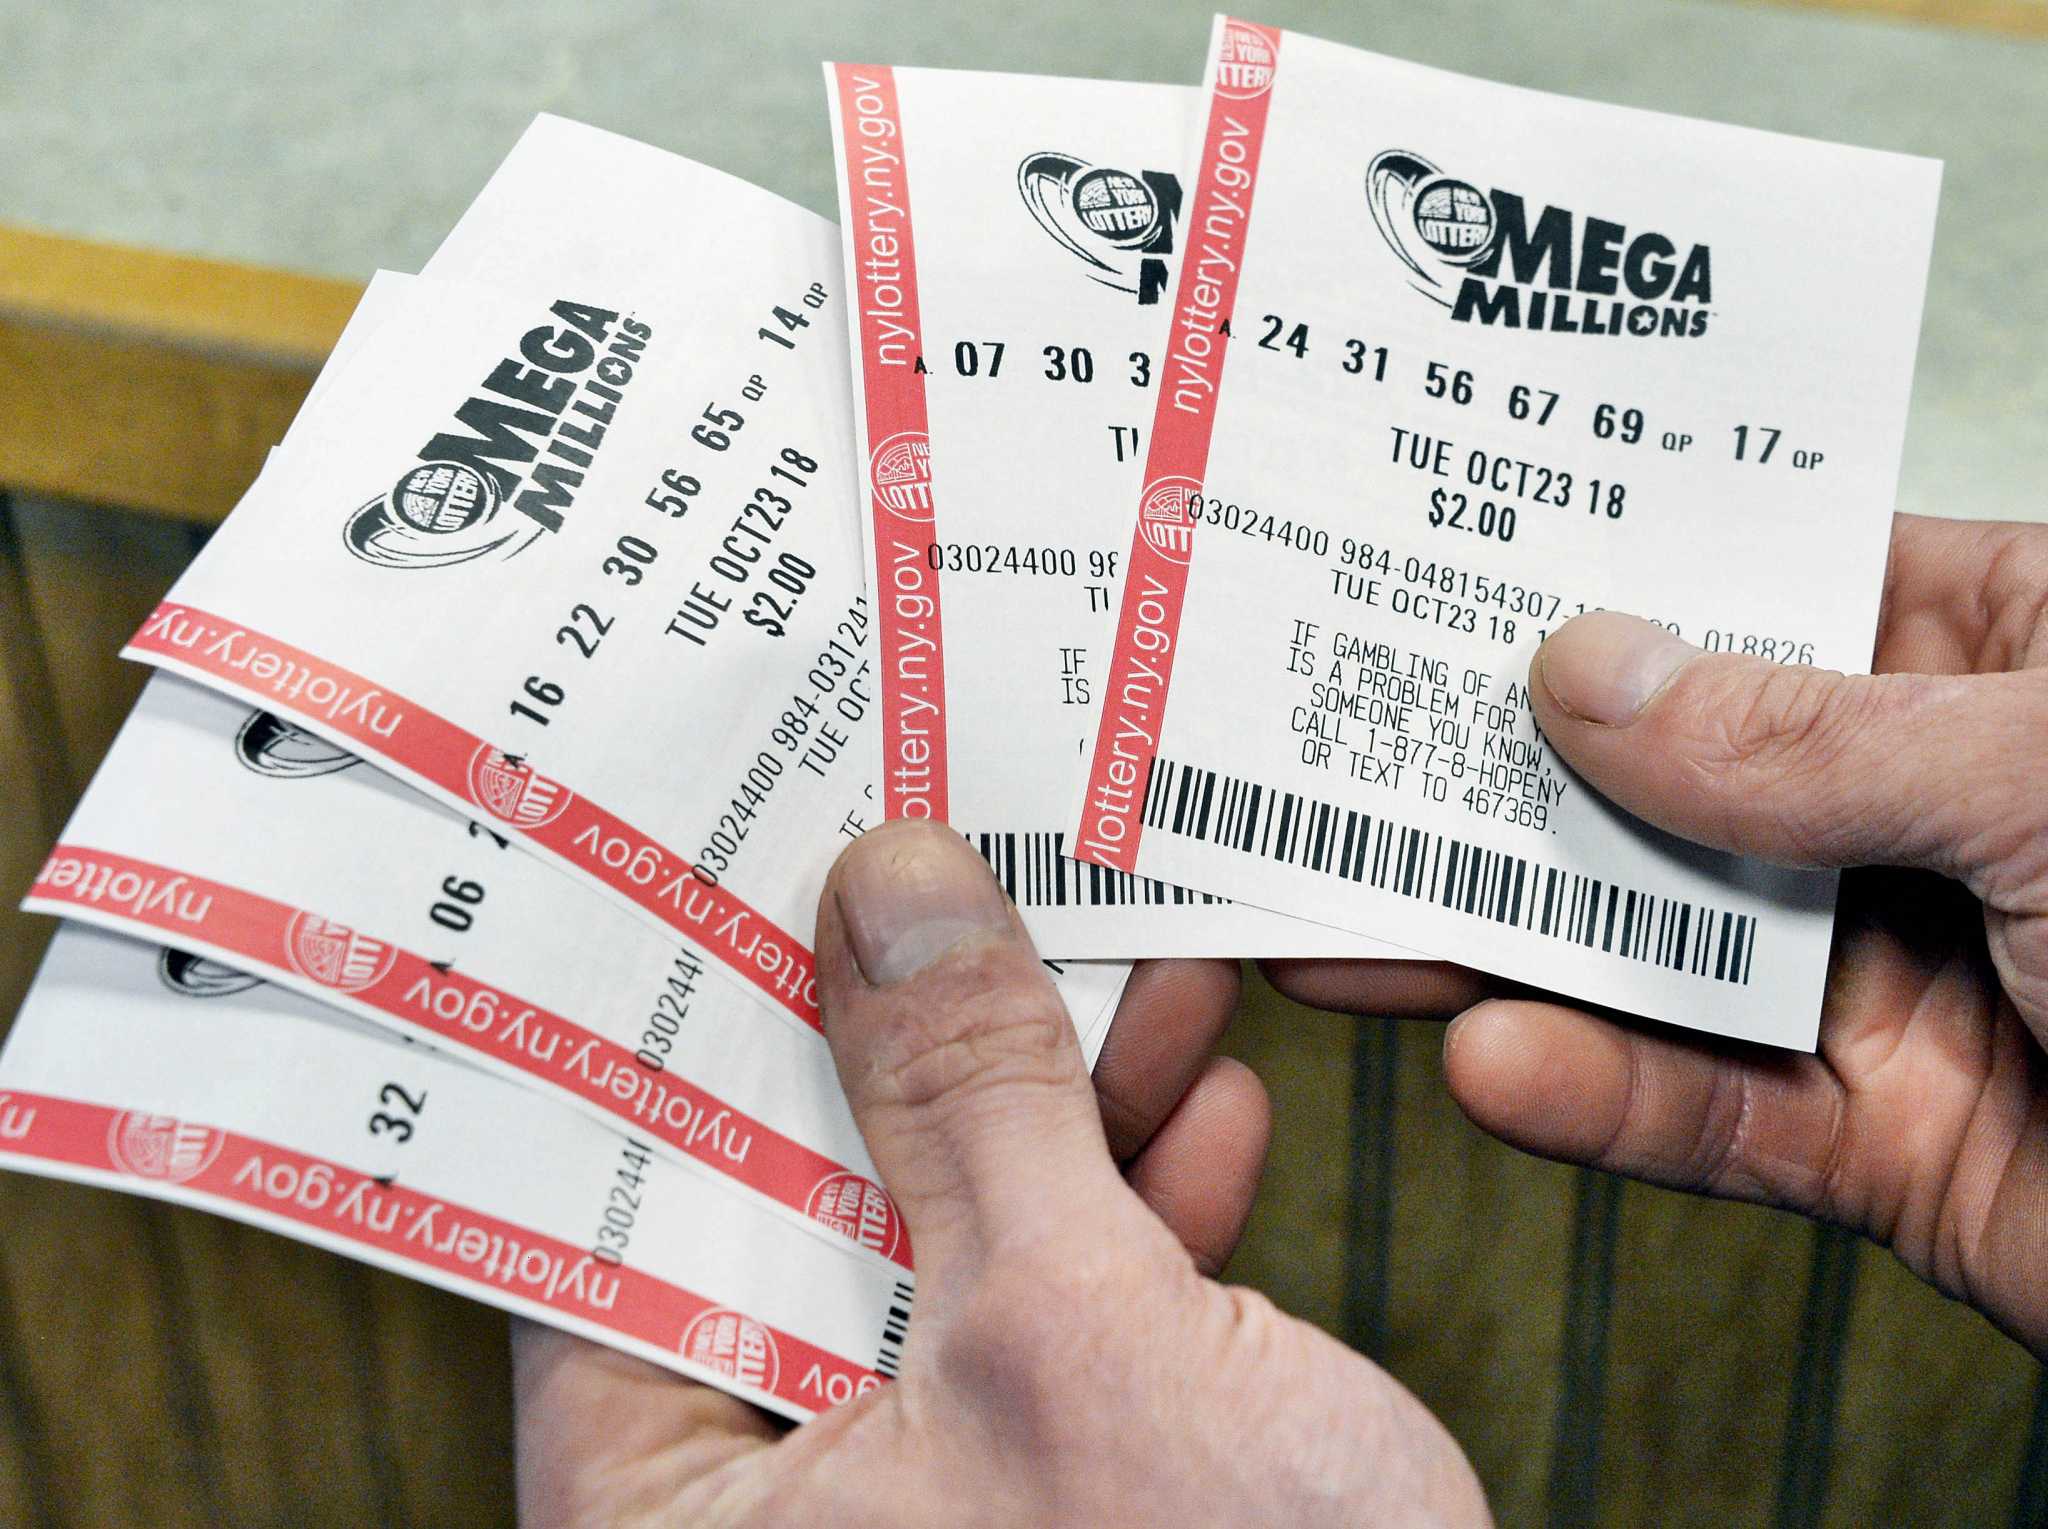 The lottery tickets of mega millions, a draw game